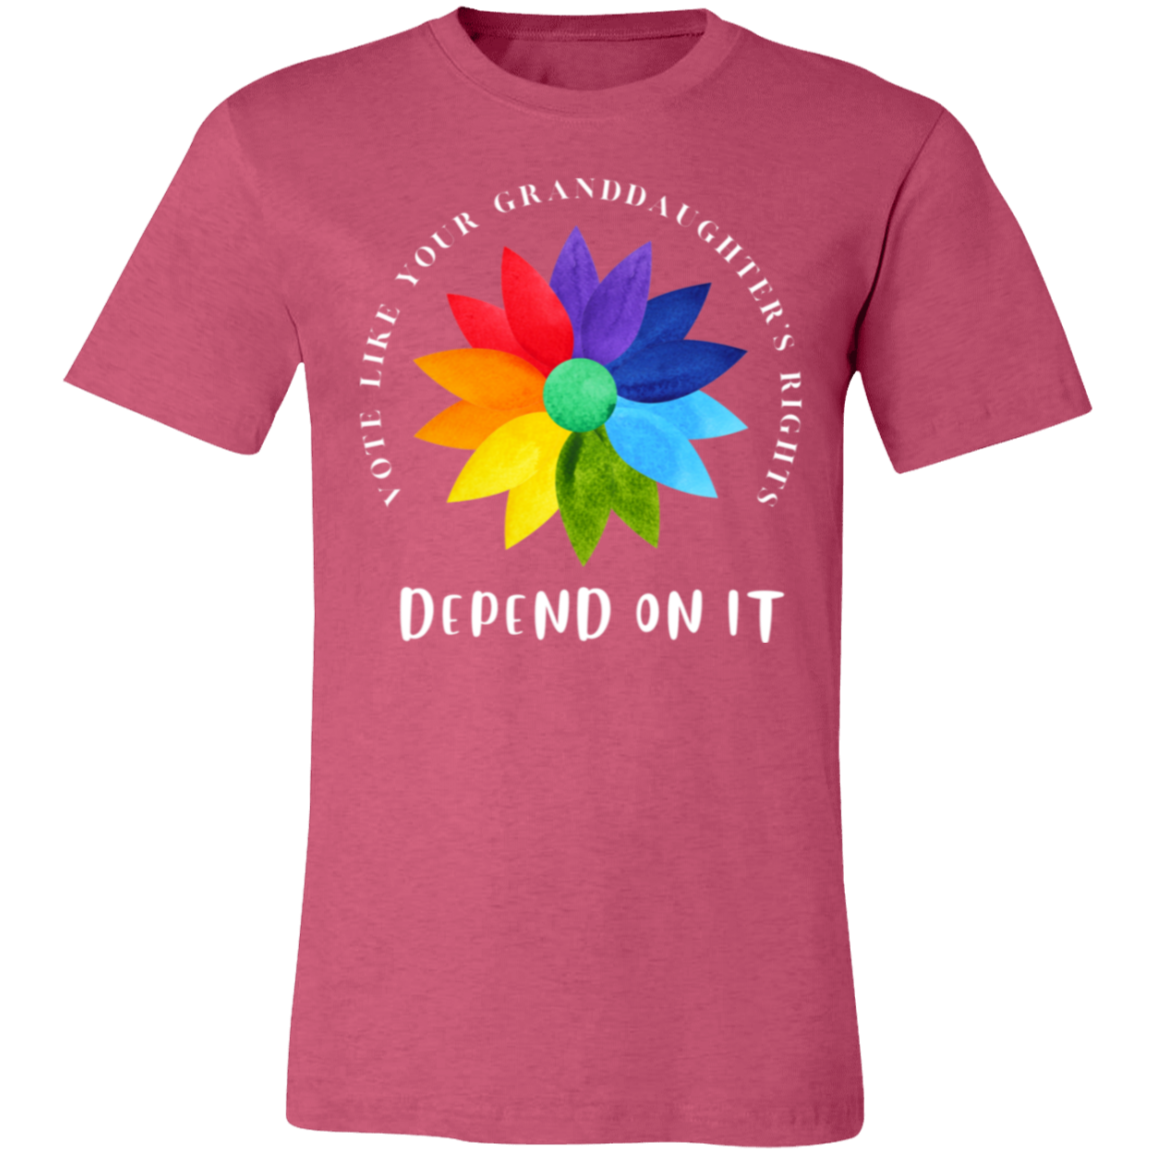 VOTE like your granddaughter’s rights DEPEND ON IT Unisex Short-Sleeve T-Shirt